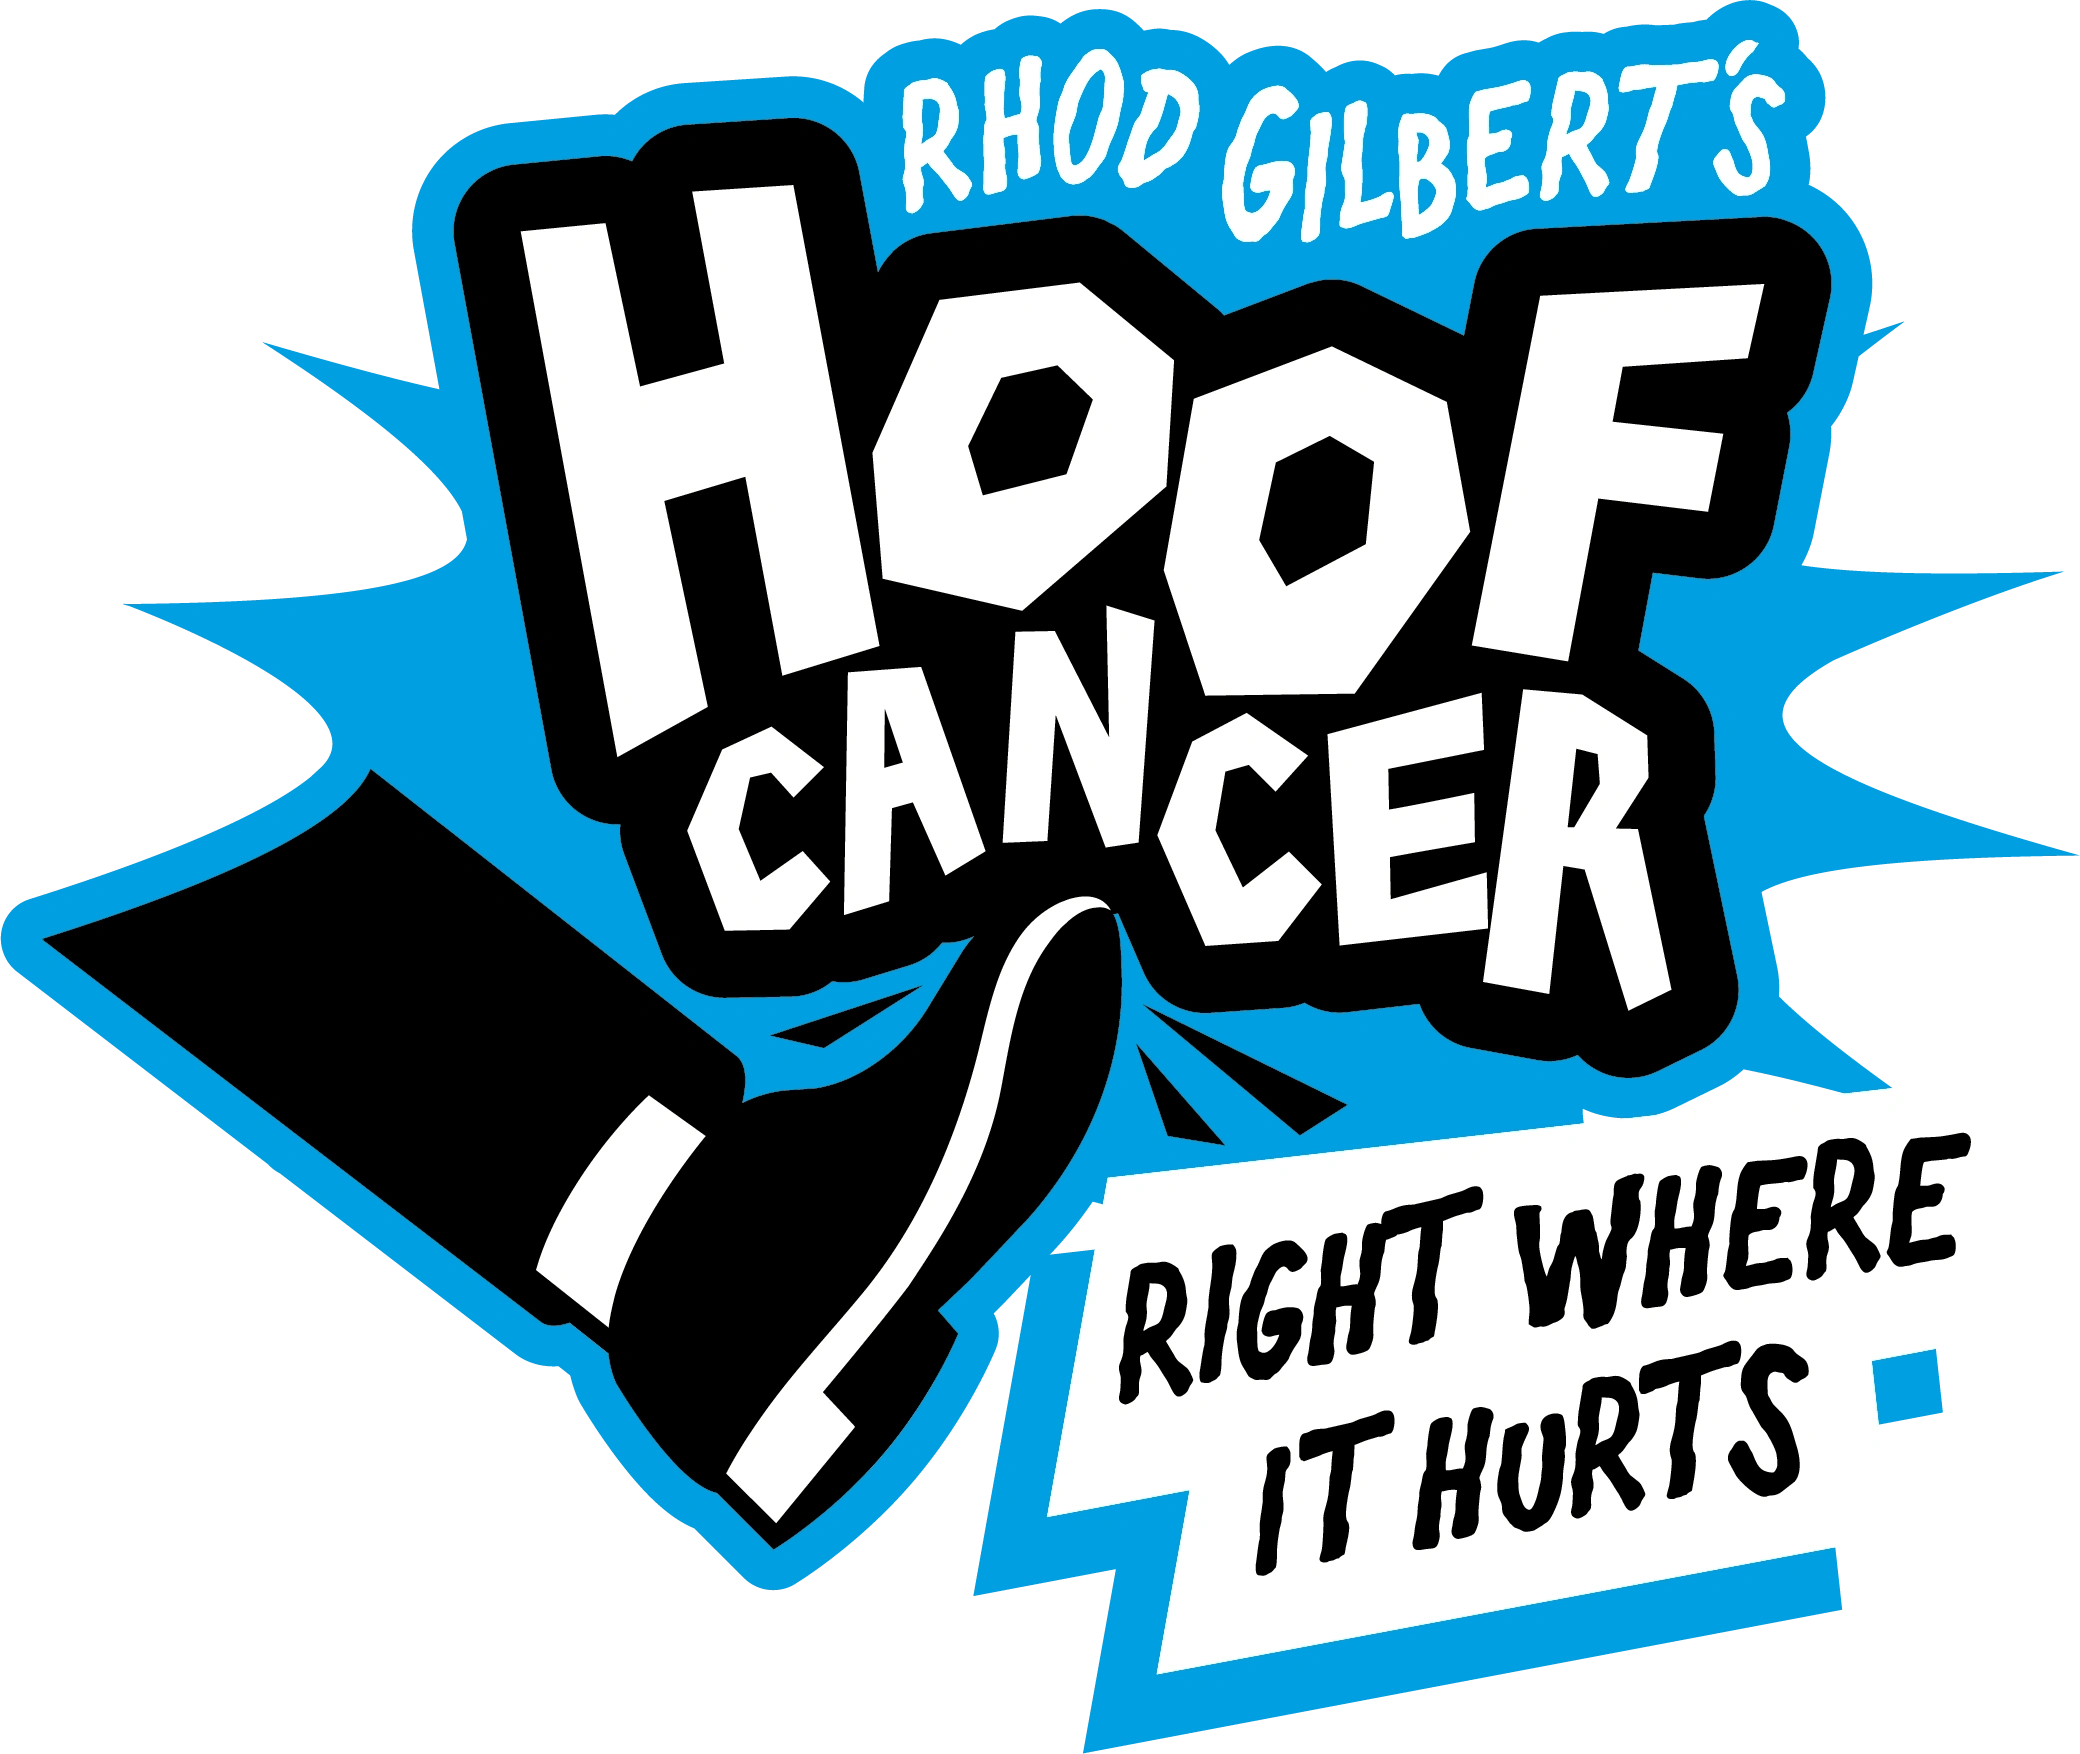 Rhod Gilbert - Hoof Cancer Right Where It Hurts - South Wales Life